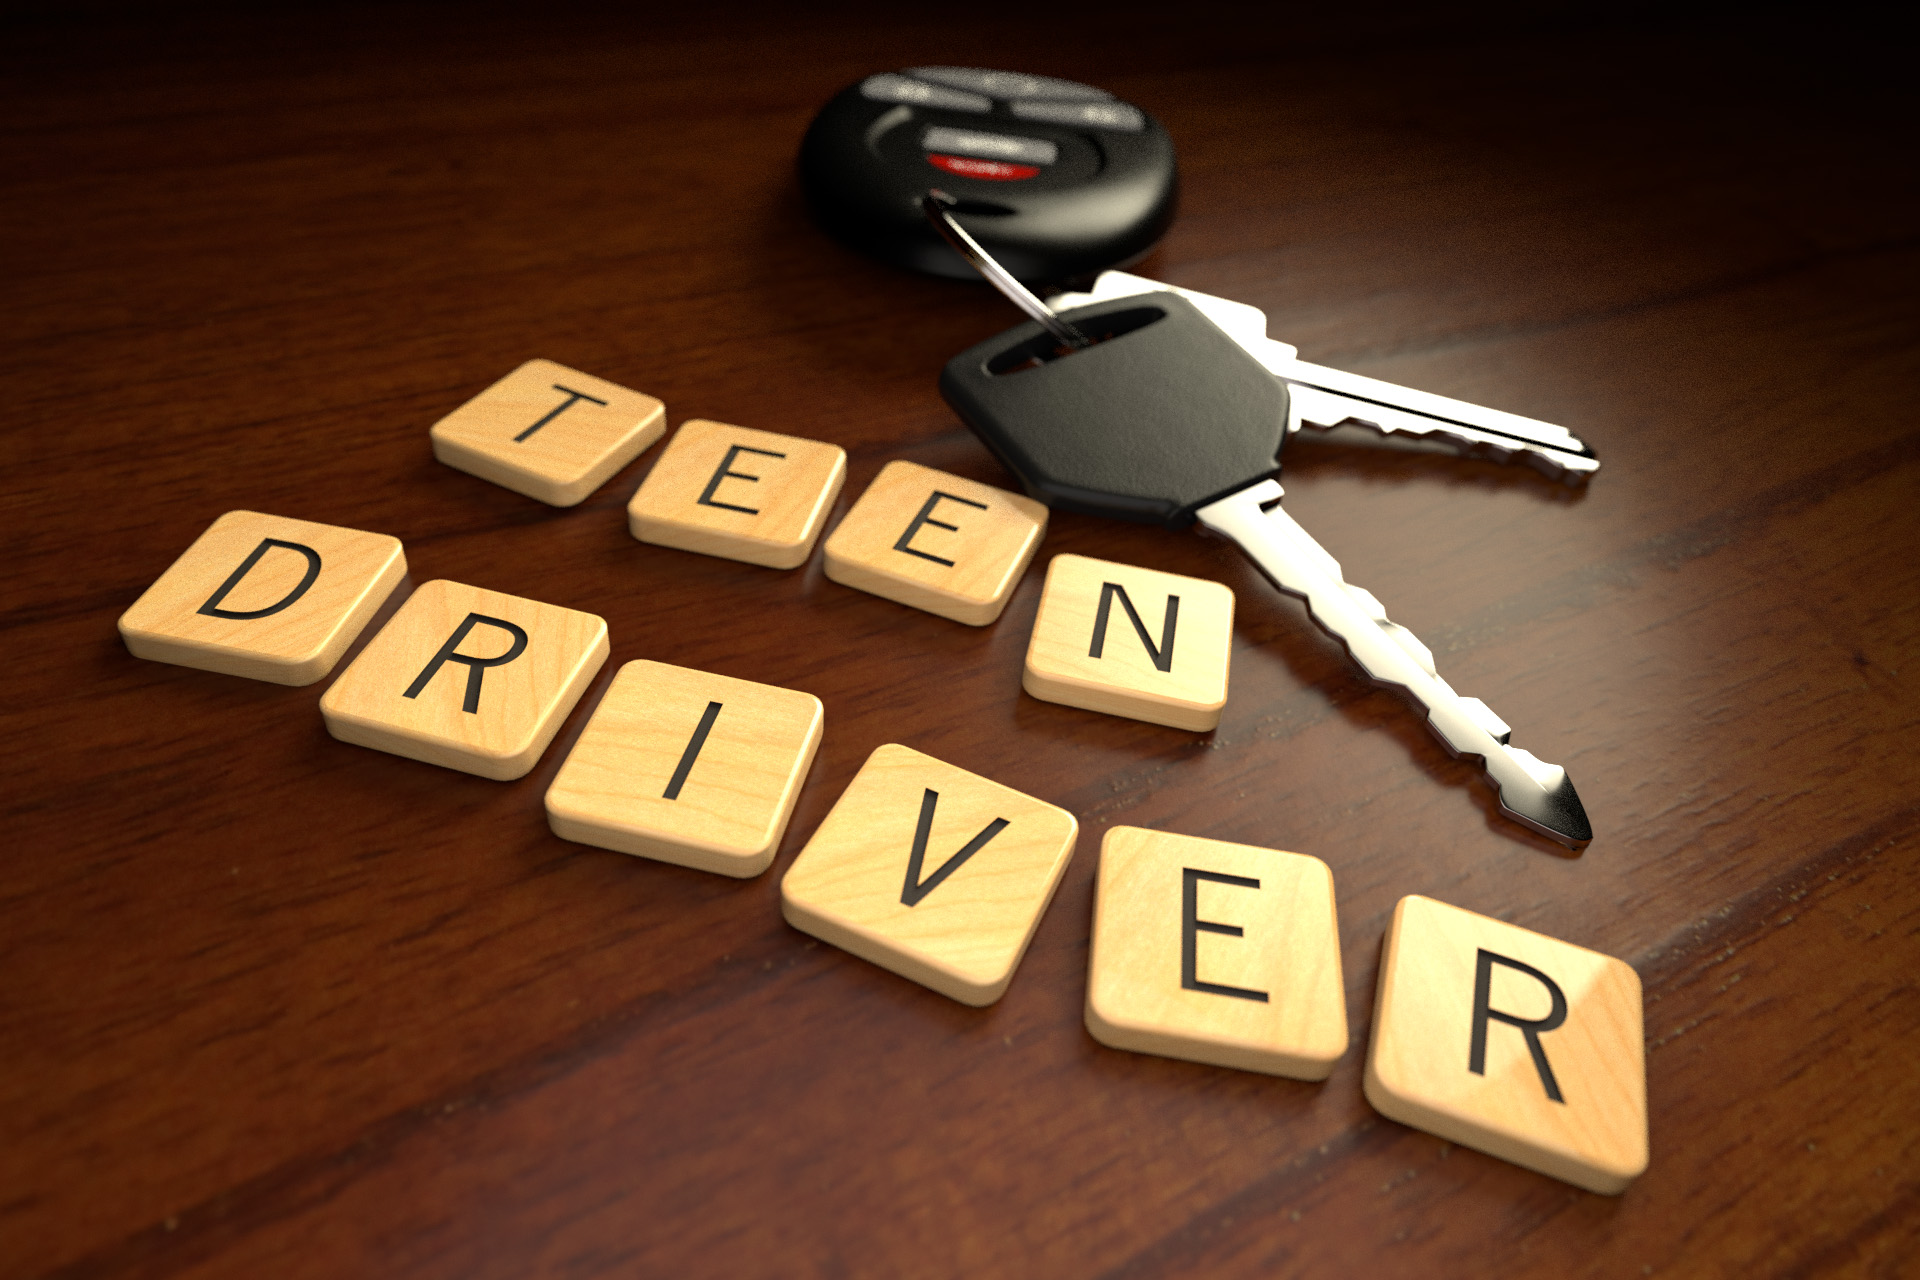 Teenage driver car insurance concept free image download